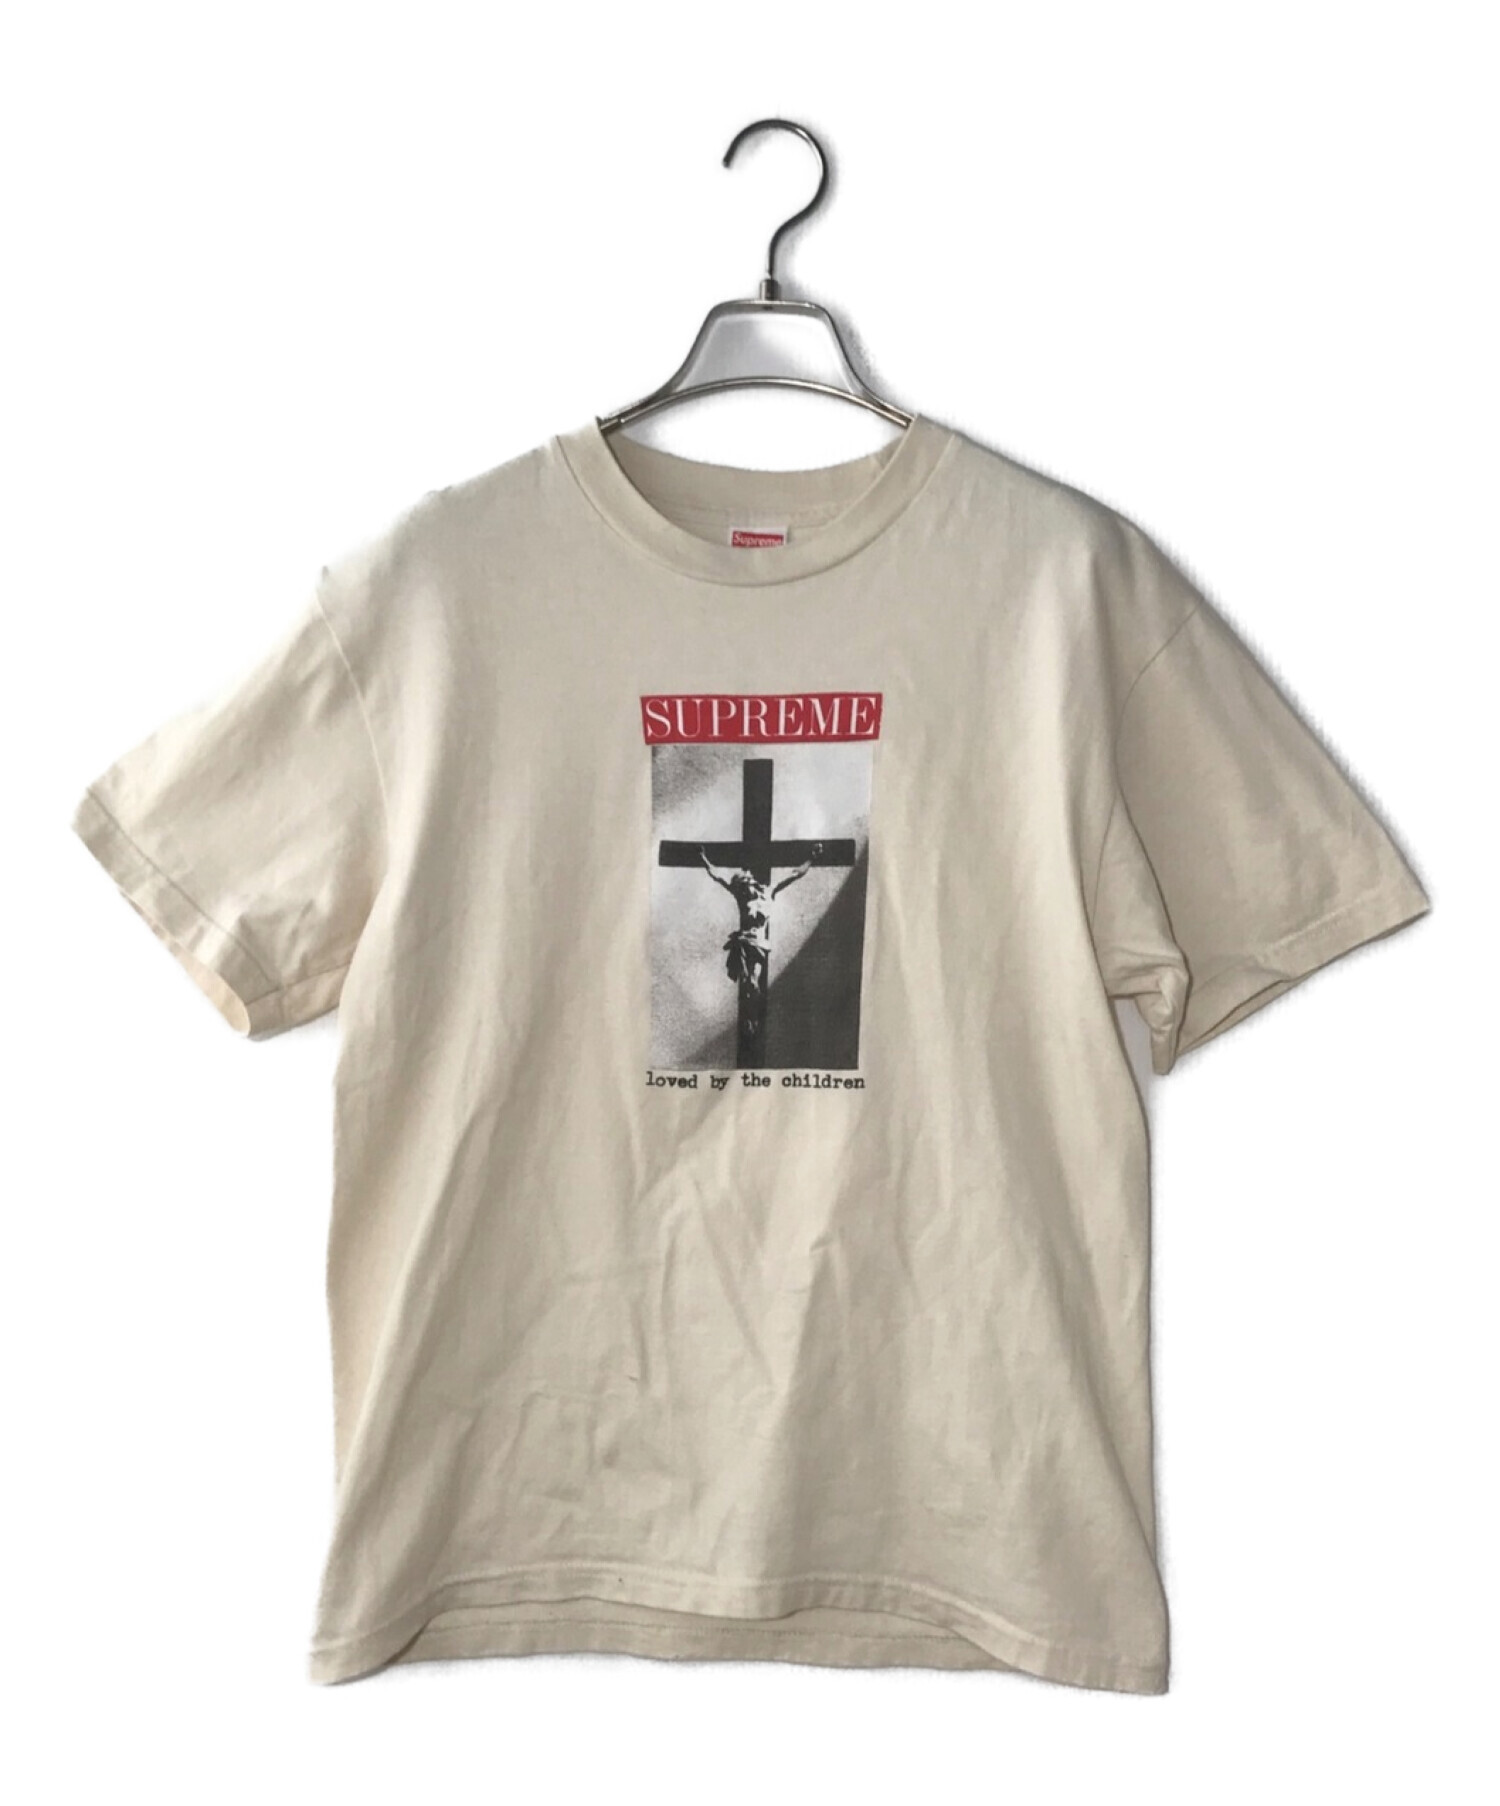 Supreme Loved By The Children Tee  サイズS